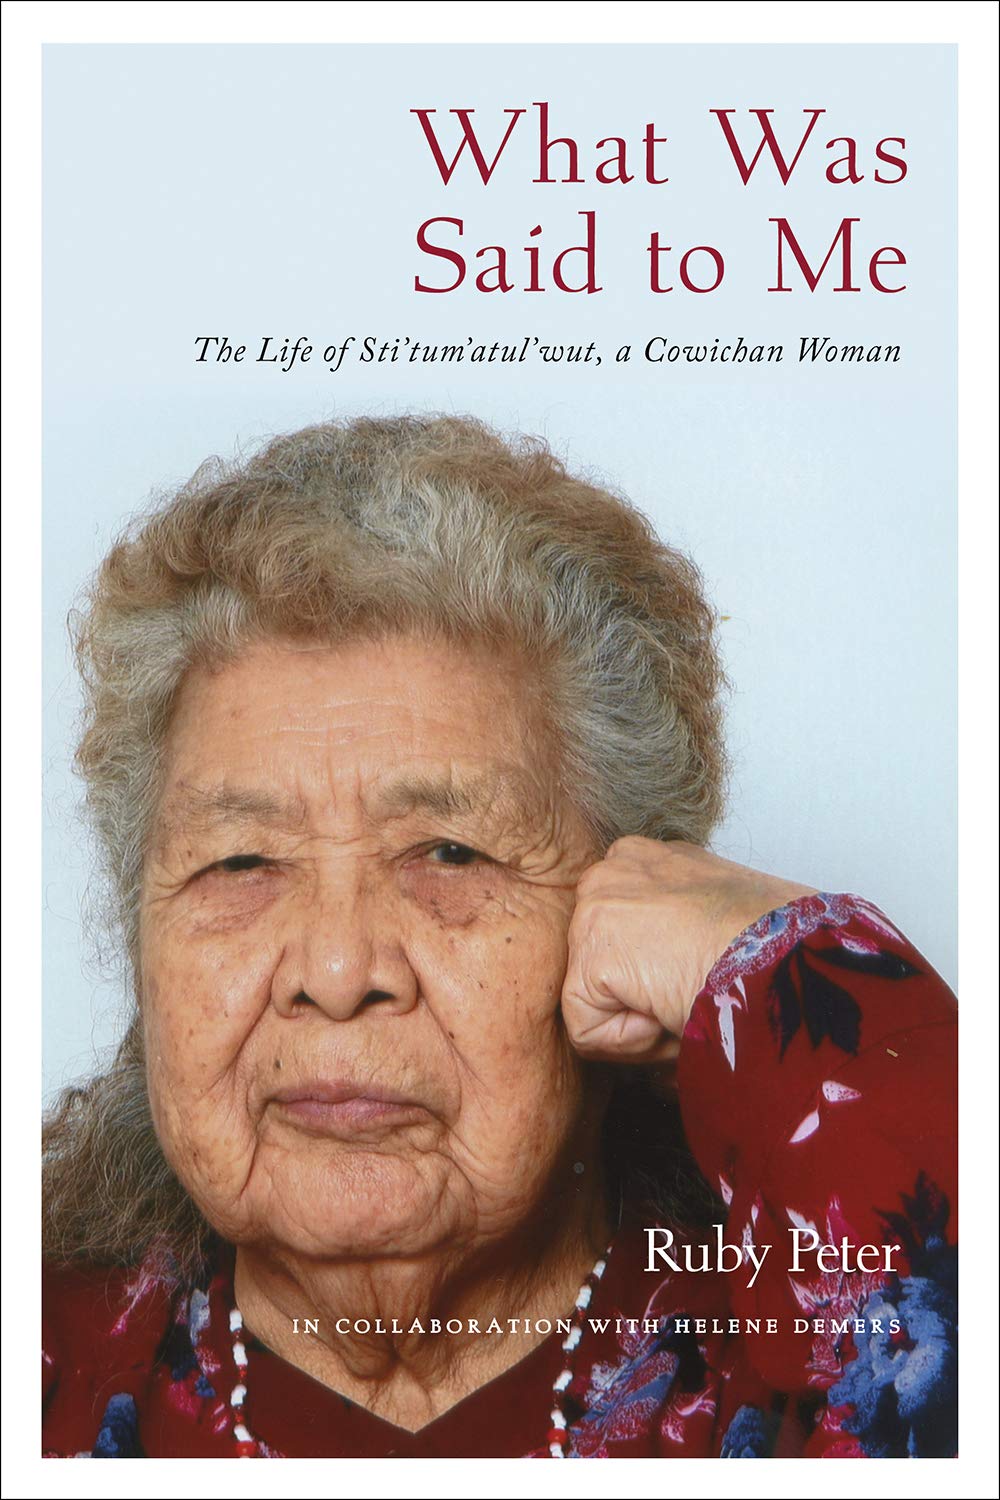 What Was Said to Me by Ruby Peter